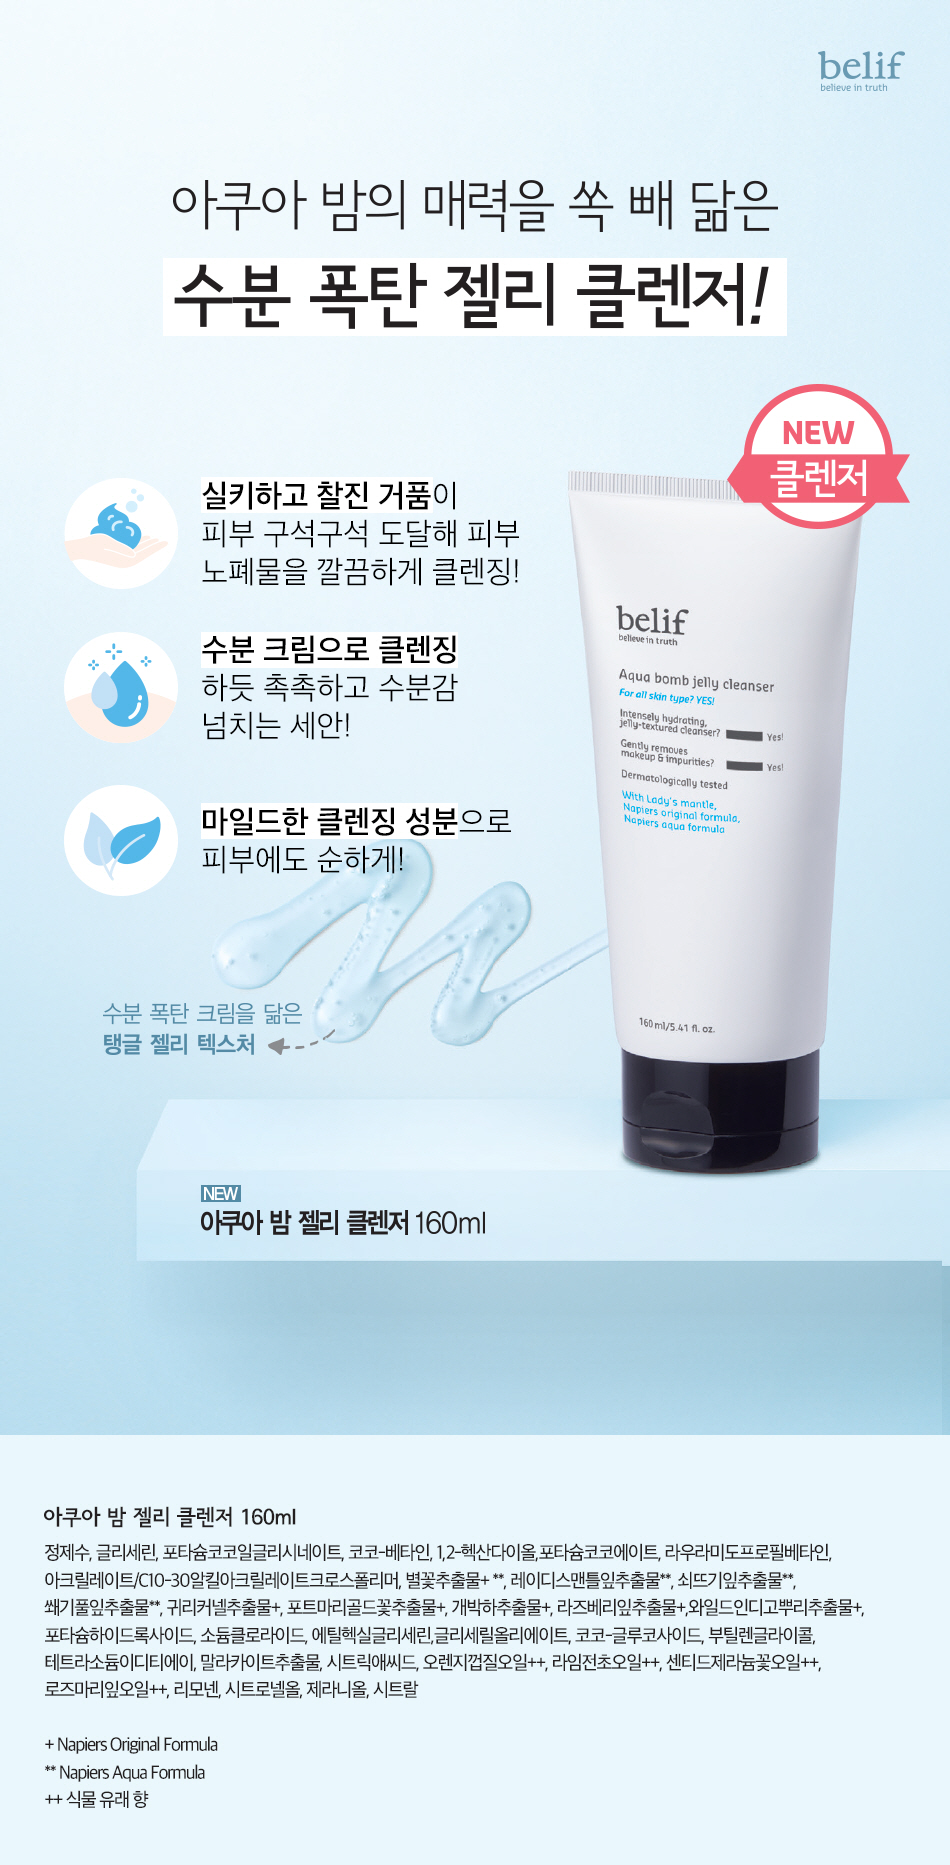 Belif Aqua Bomb Moisturizer and Jelly Cleanser Duo Pack